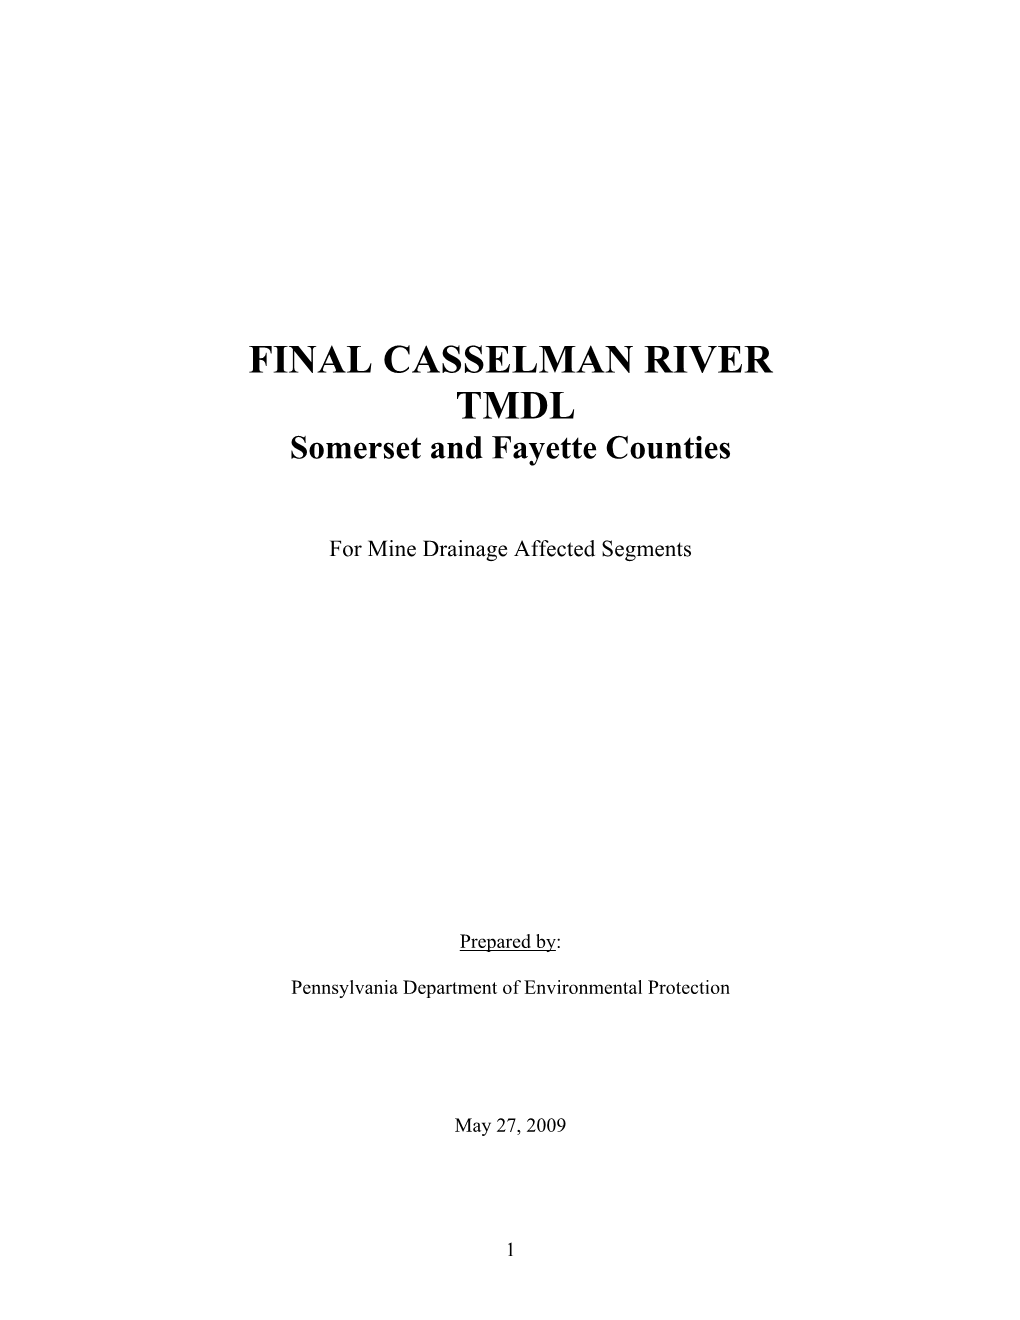 FINAL CASSELMAN RIVER TMDL Somerset and Fayette Counties